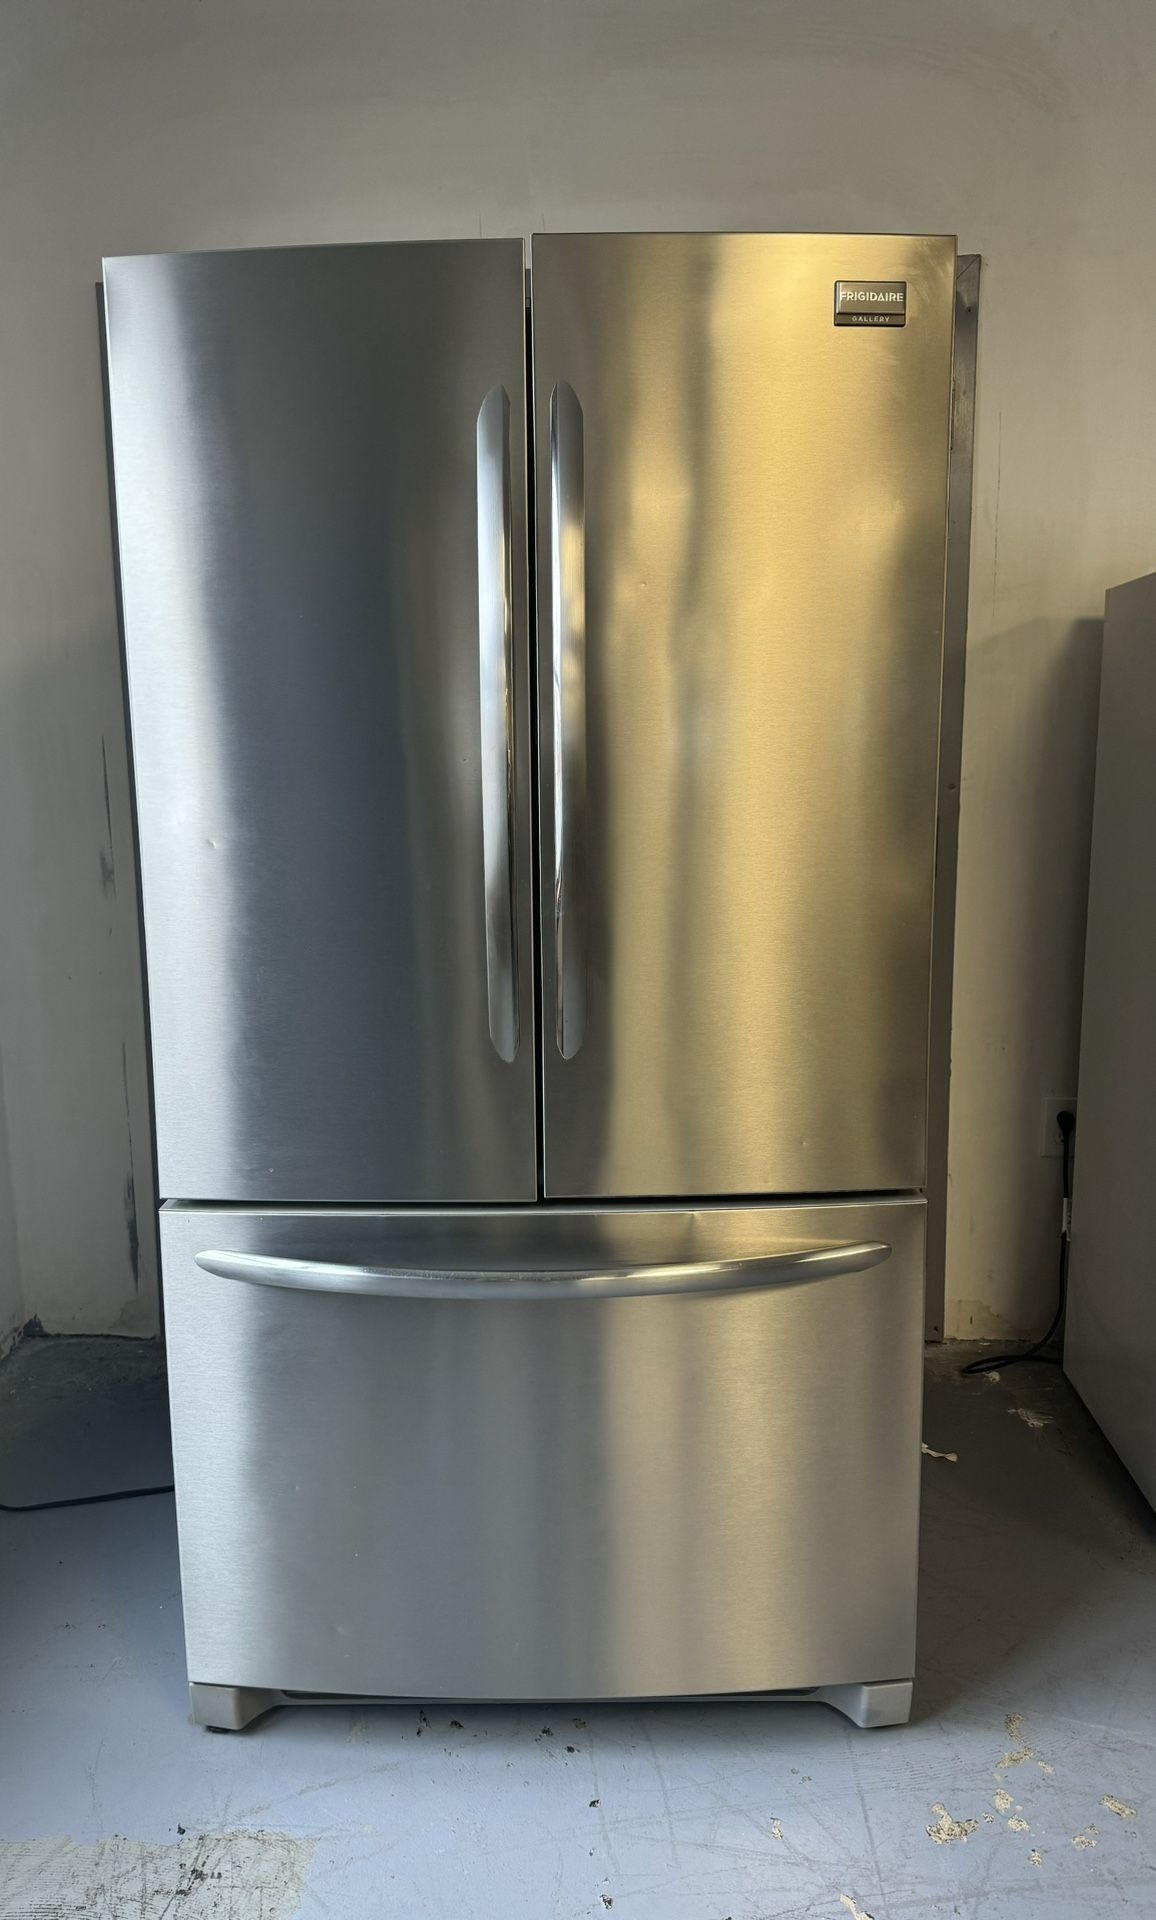 Refrigerator 70 High By 36 Like New Everything Works Perfectly Very Clean 